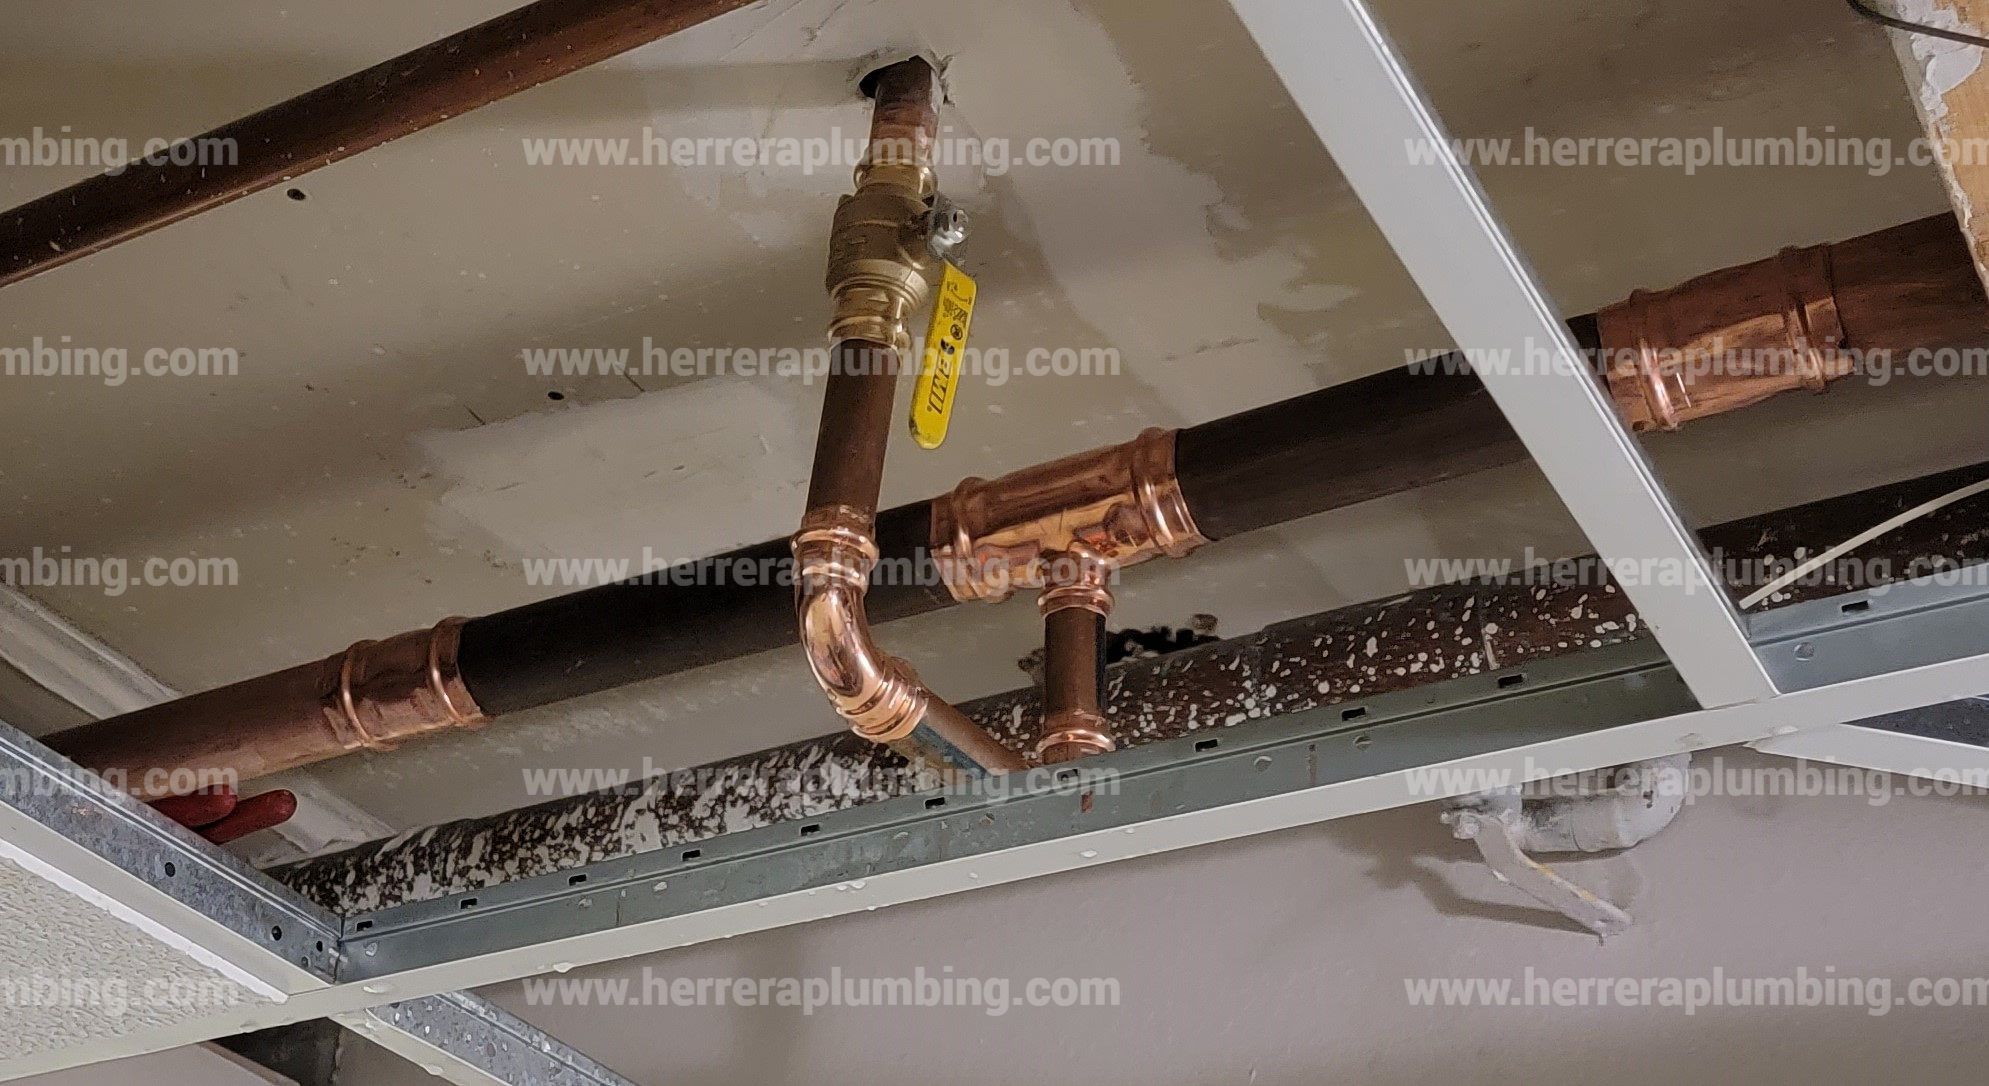 Commercial Copper Water Lines Repair In Houston